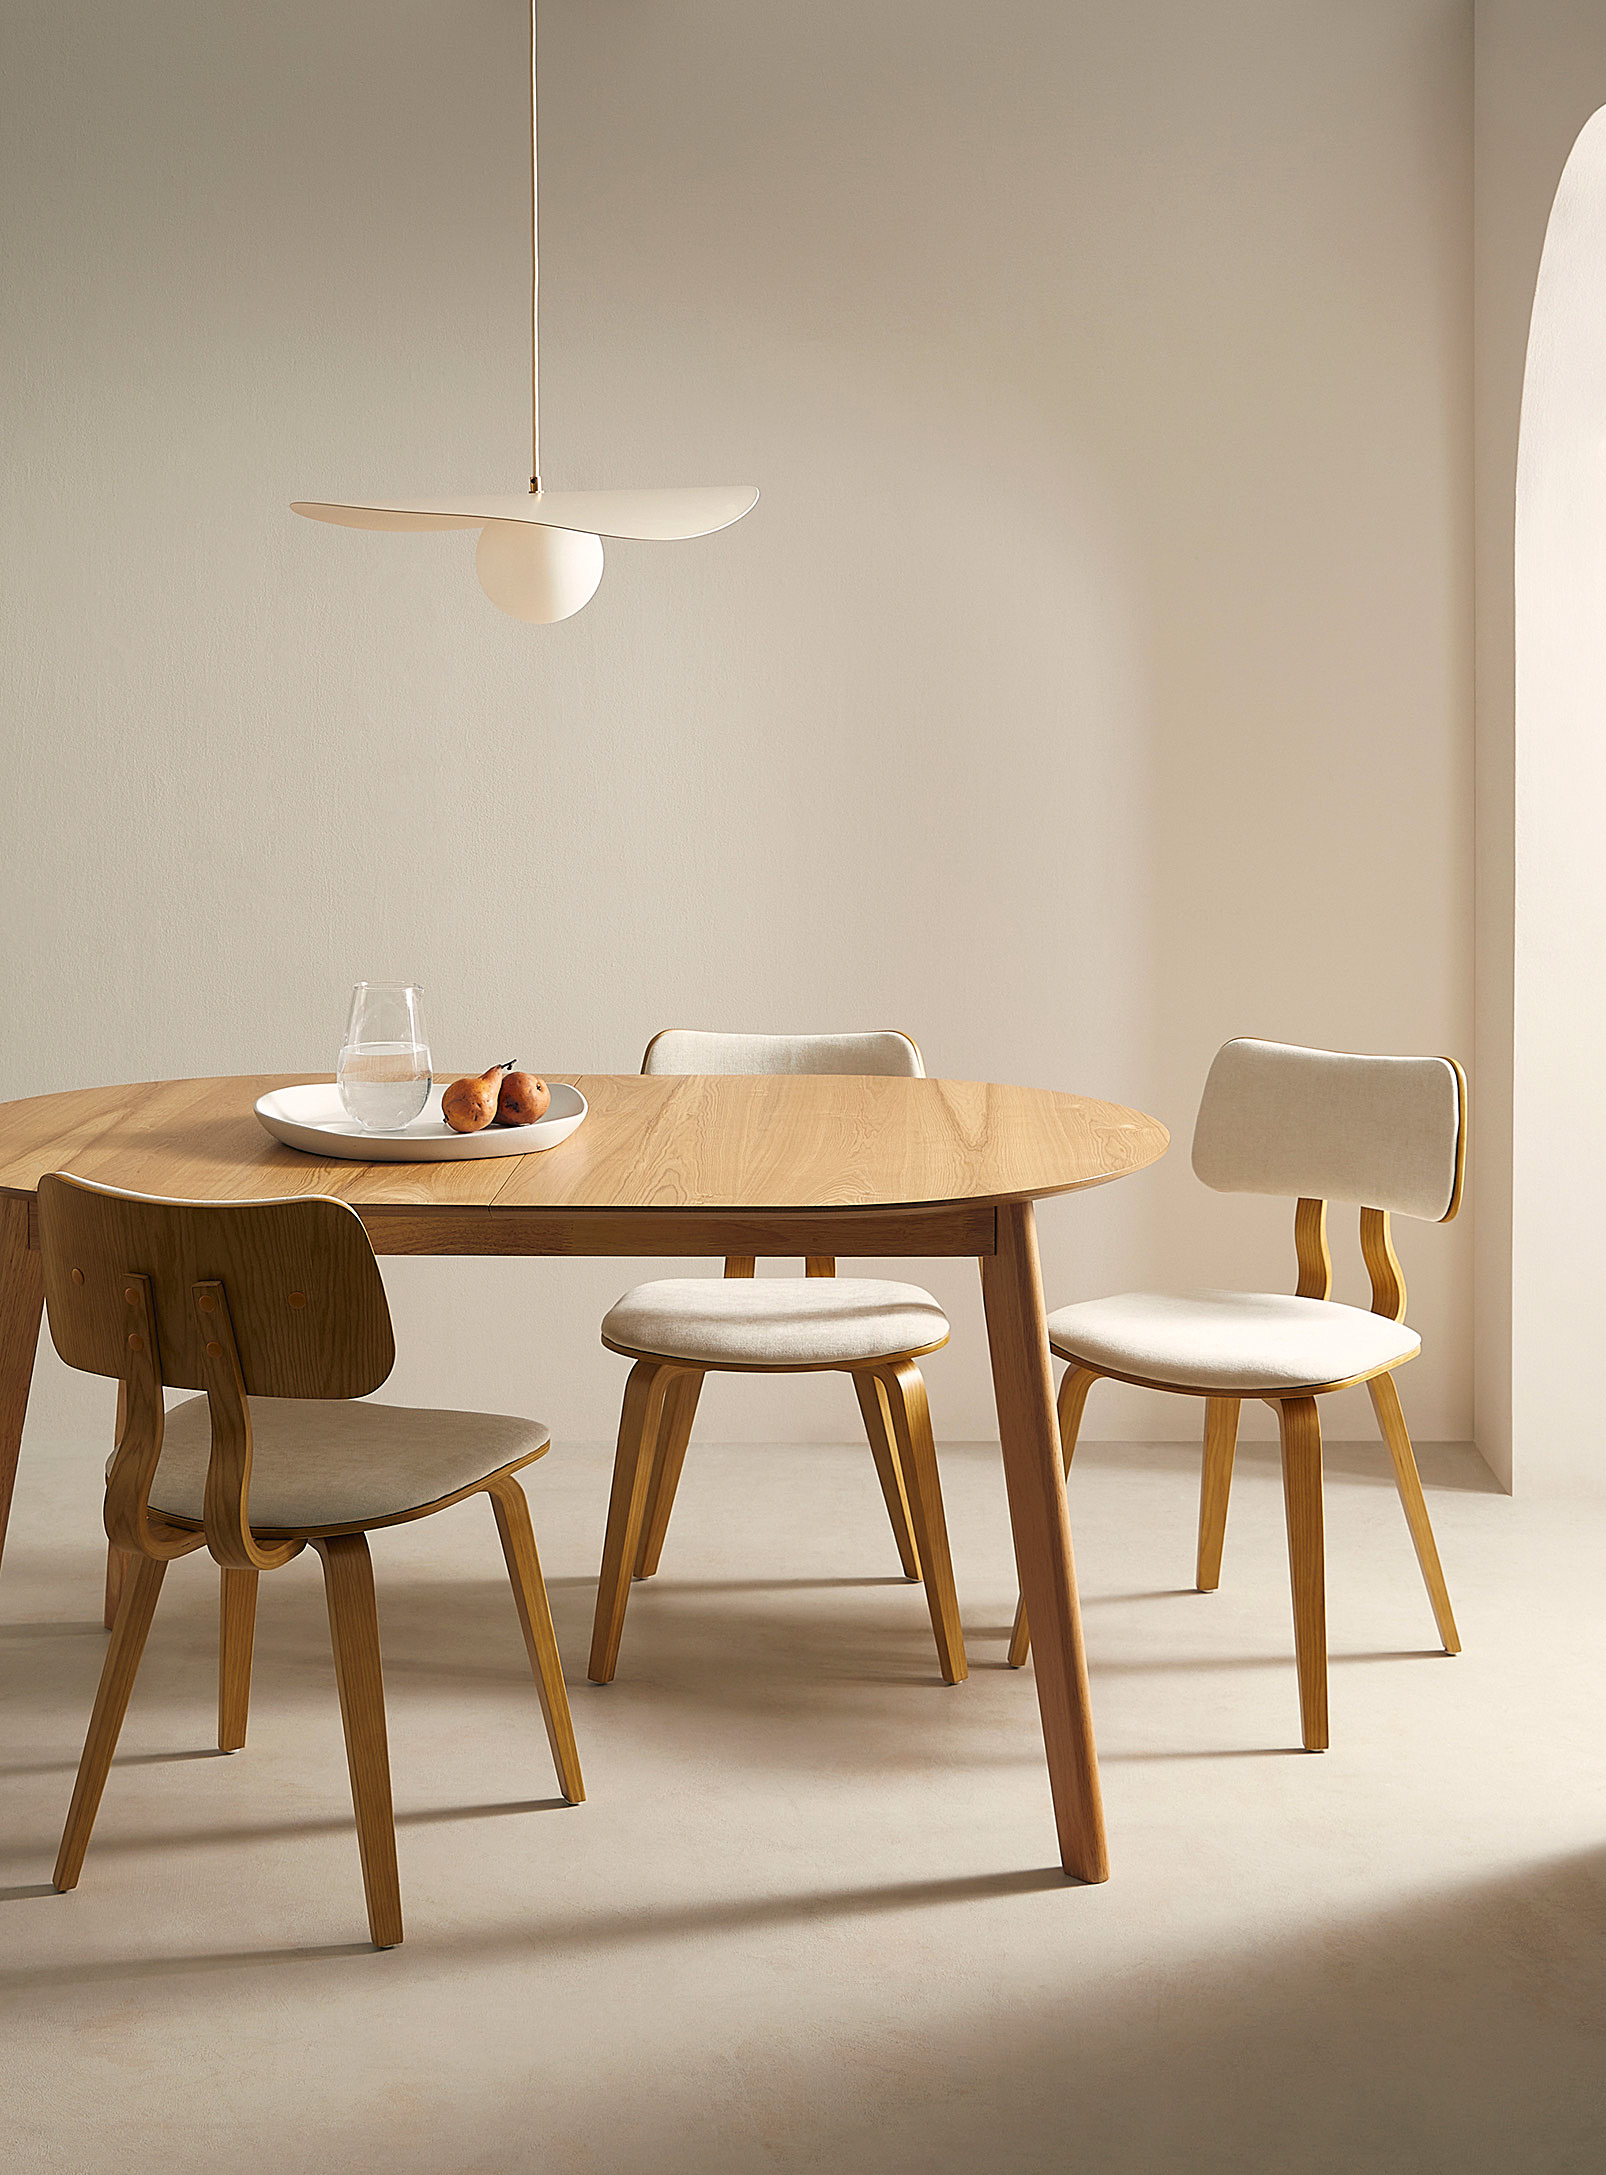 Simons Maison Rounded Wood Table With Extension In Assorted